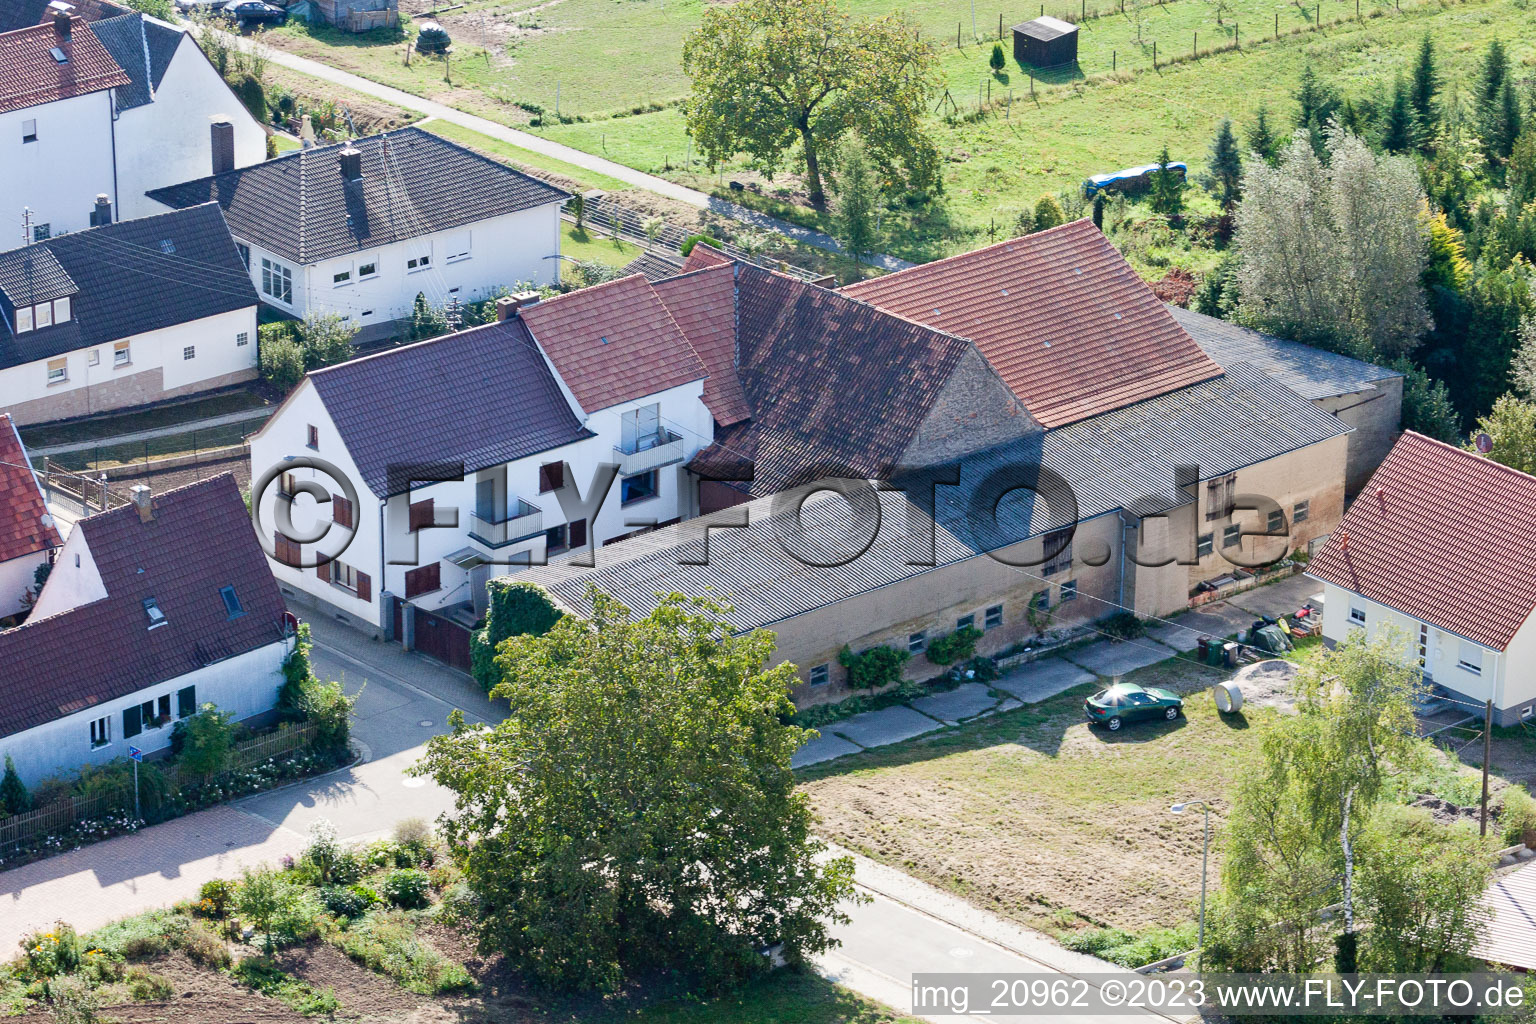 At the kiln in Freckenfeld in the state Rhineland-Palatinate, Germany viewn from the air